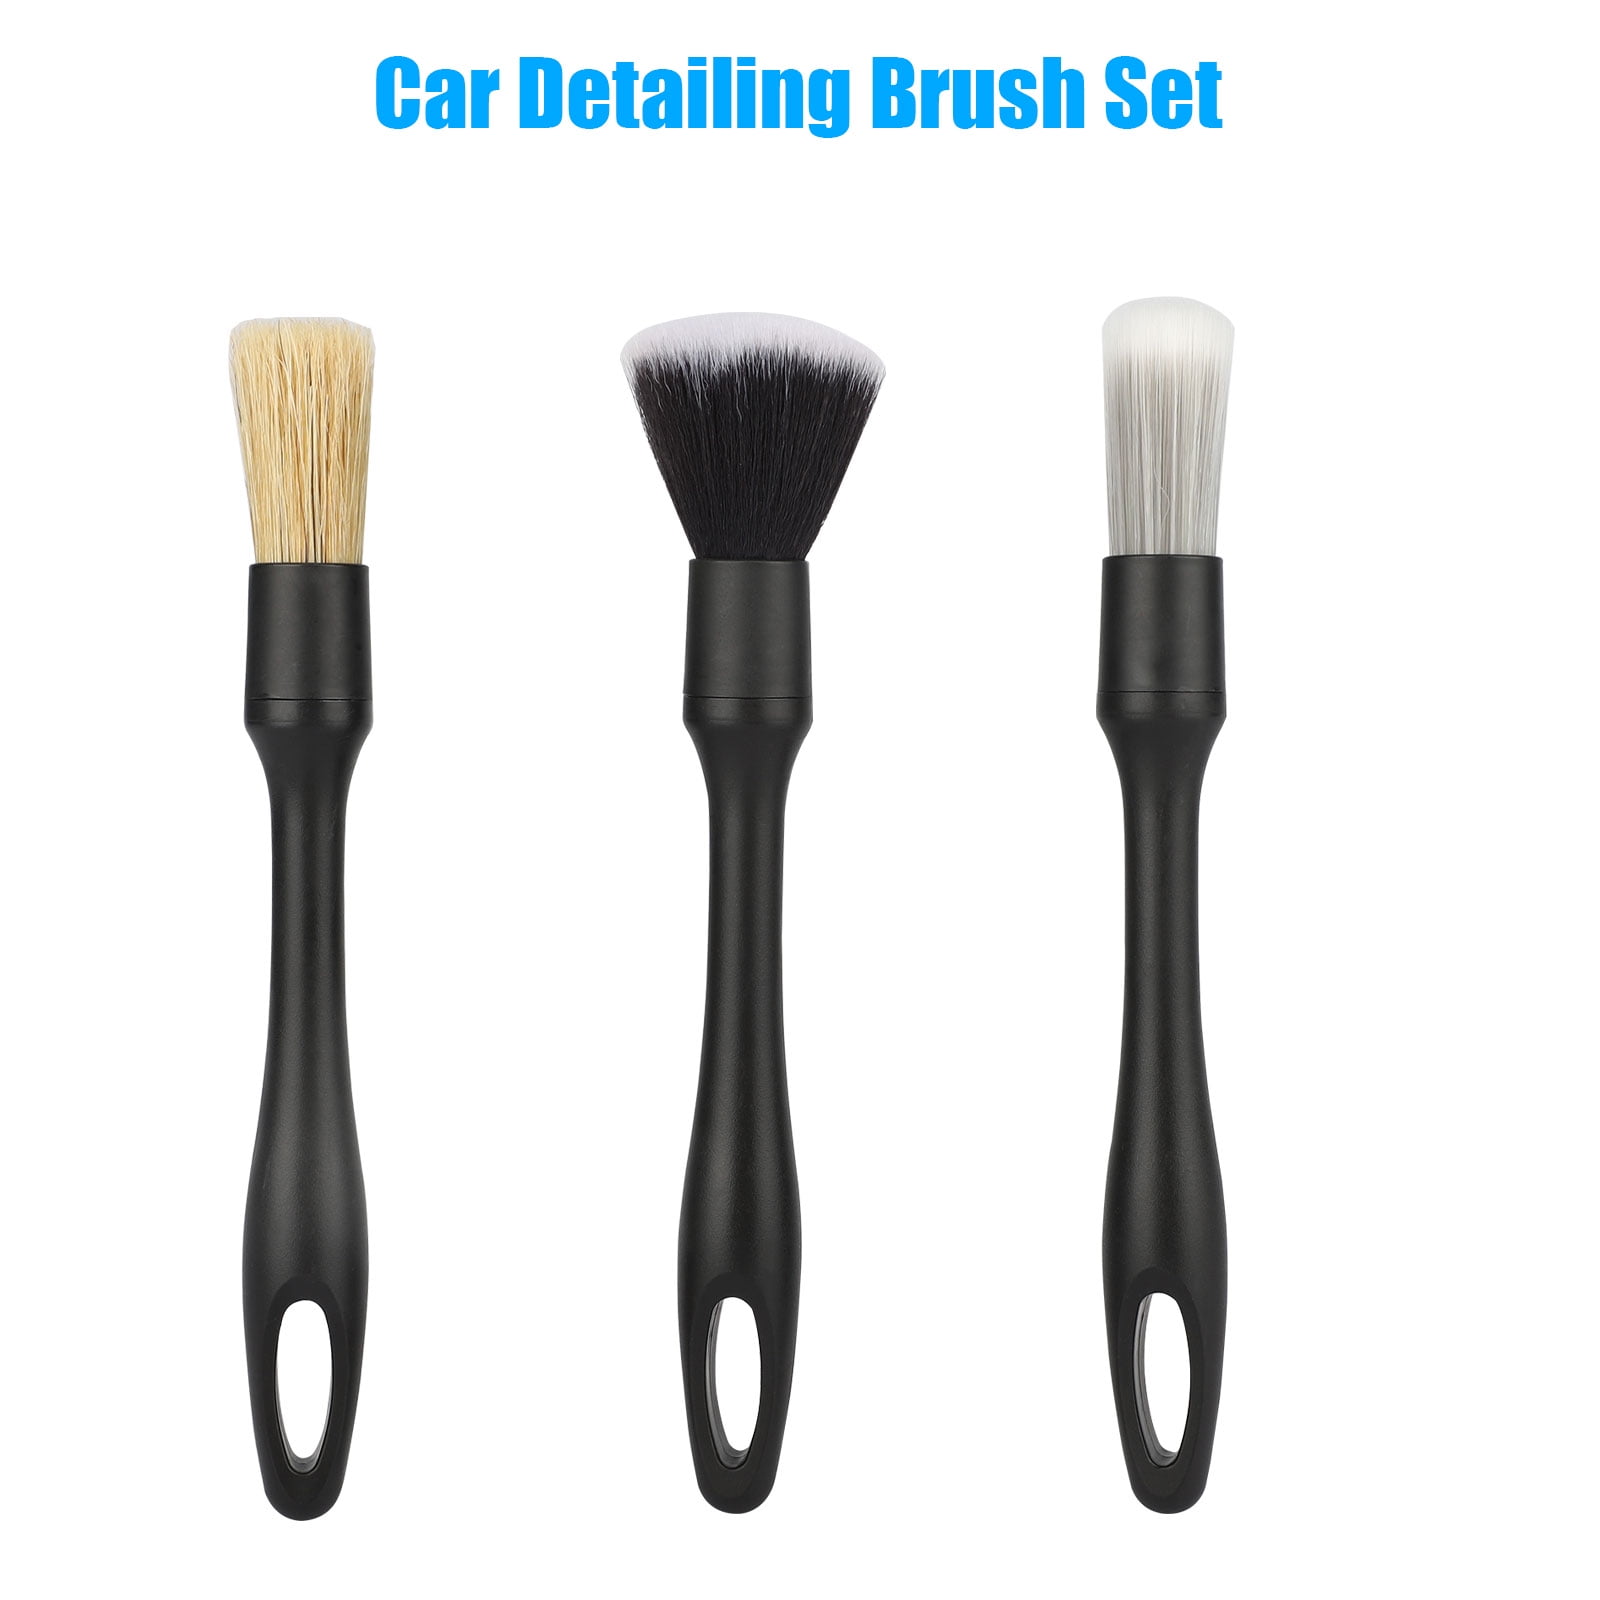 12pcs Car Detailing Brush Set for Cleaning Wheels, EEEkit Auto Detailing  Kit for Cleaning Car Motorcycle Interior, Exterior, Dashboard Including